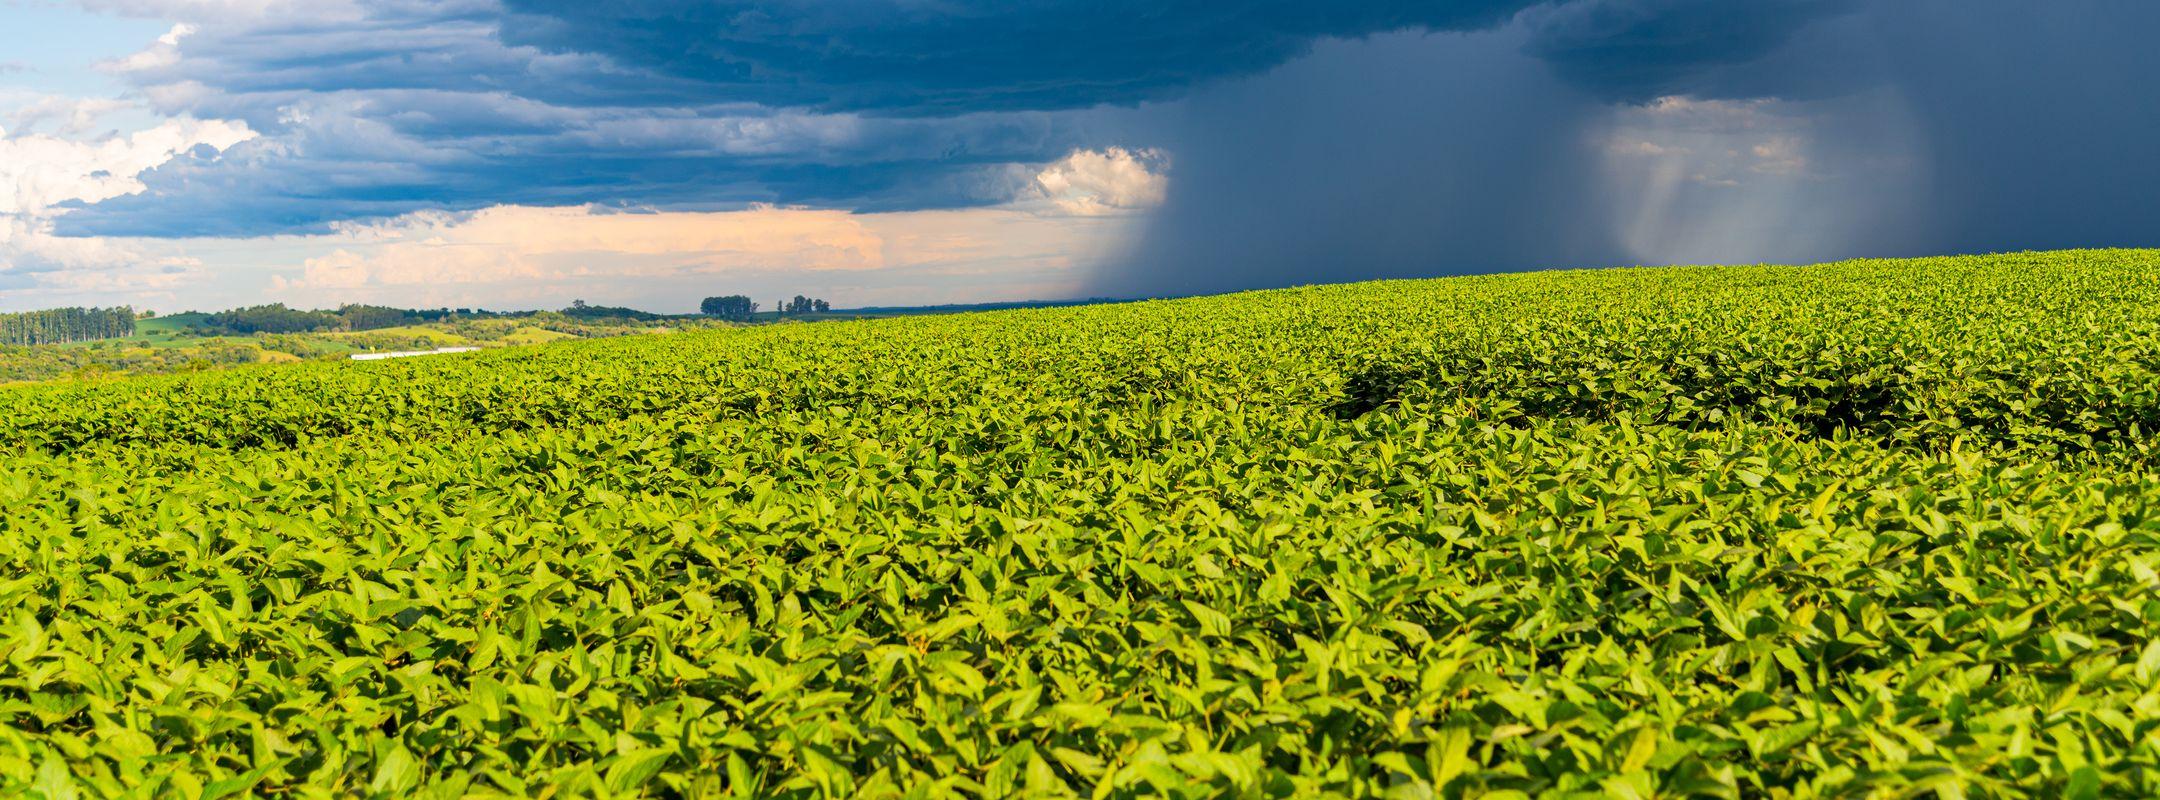 Storm over a soy plantation